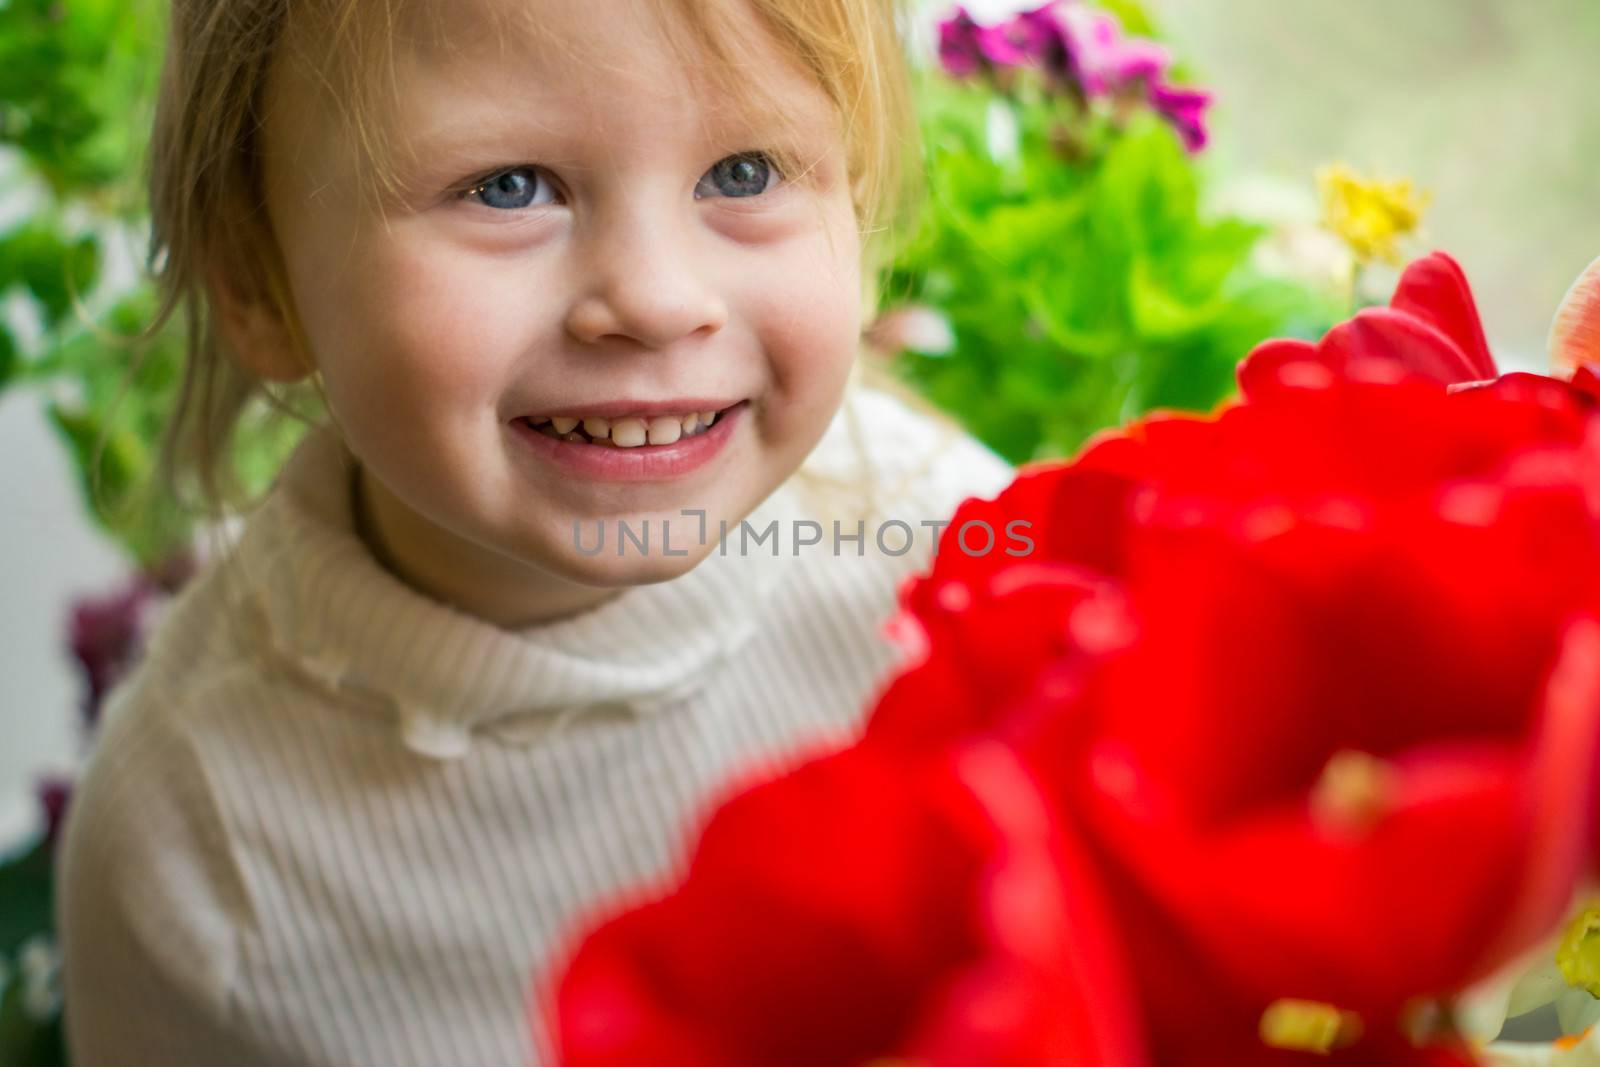 Little girl congratulates and gives tulips